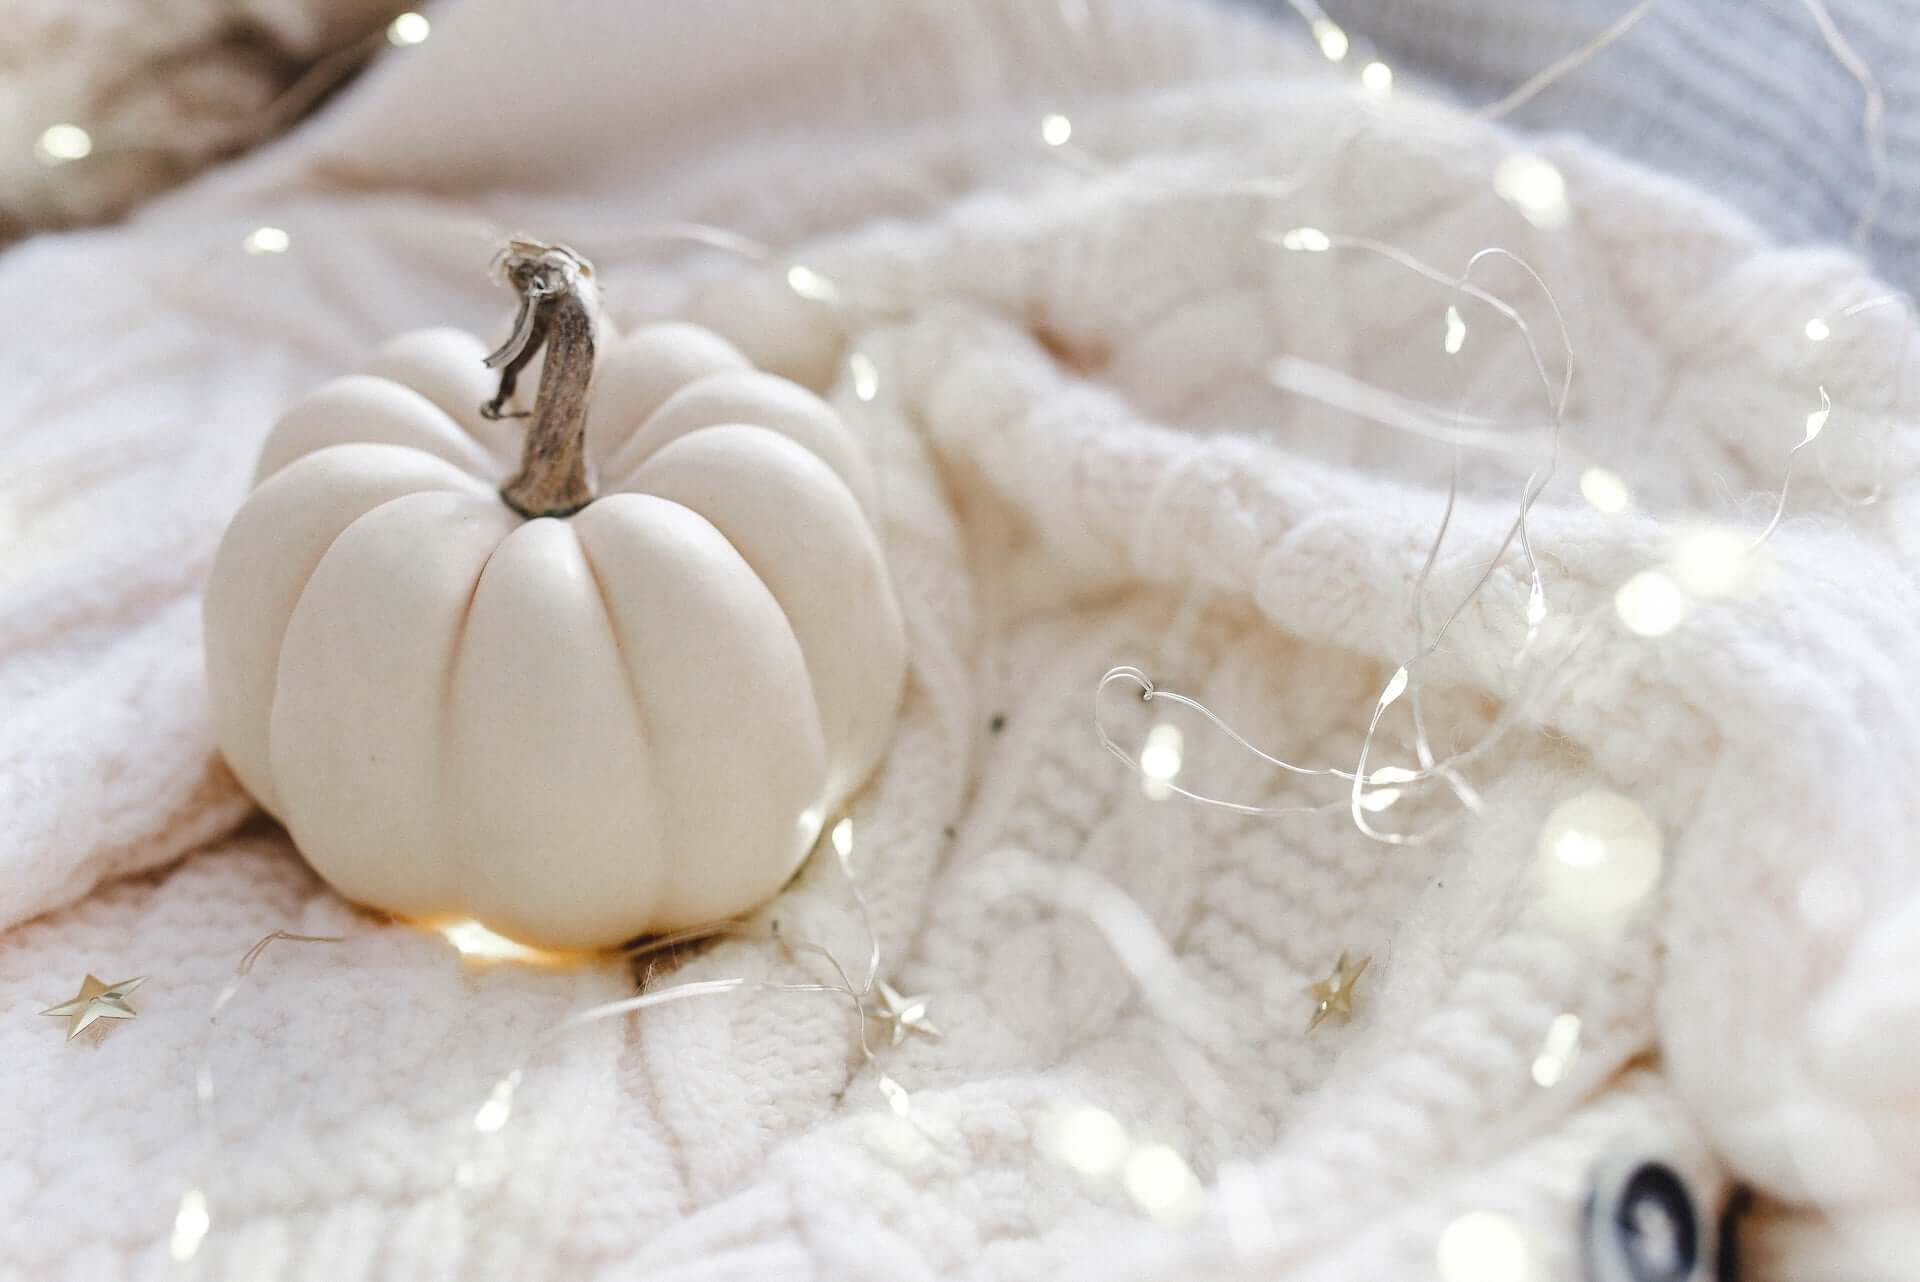 A white pumpkin sitting on a white knit blanket covered in fairy lights.